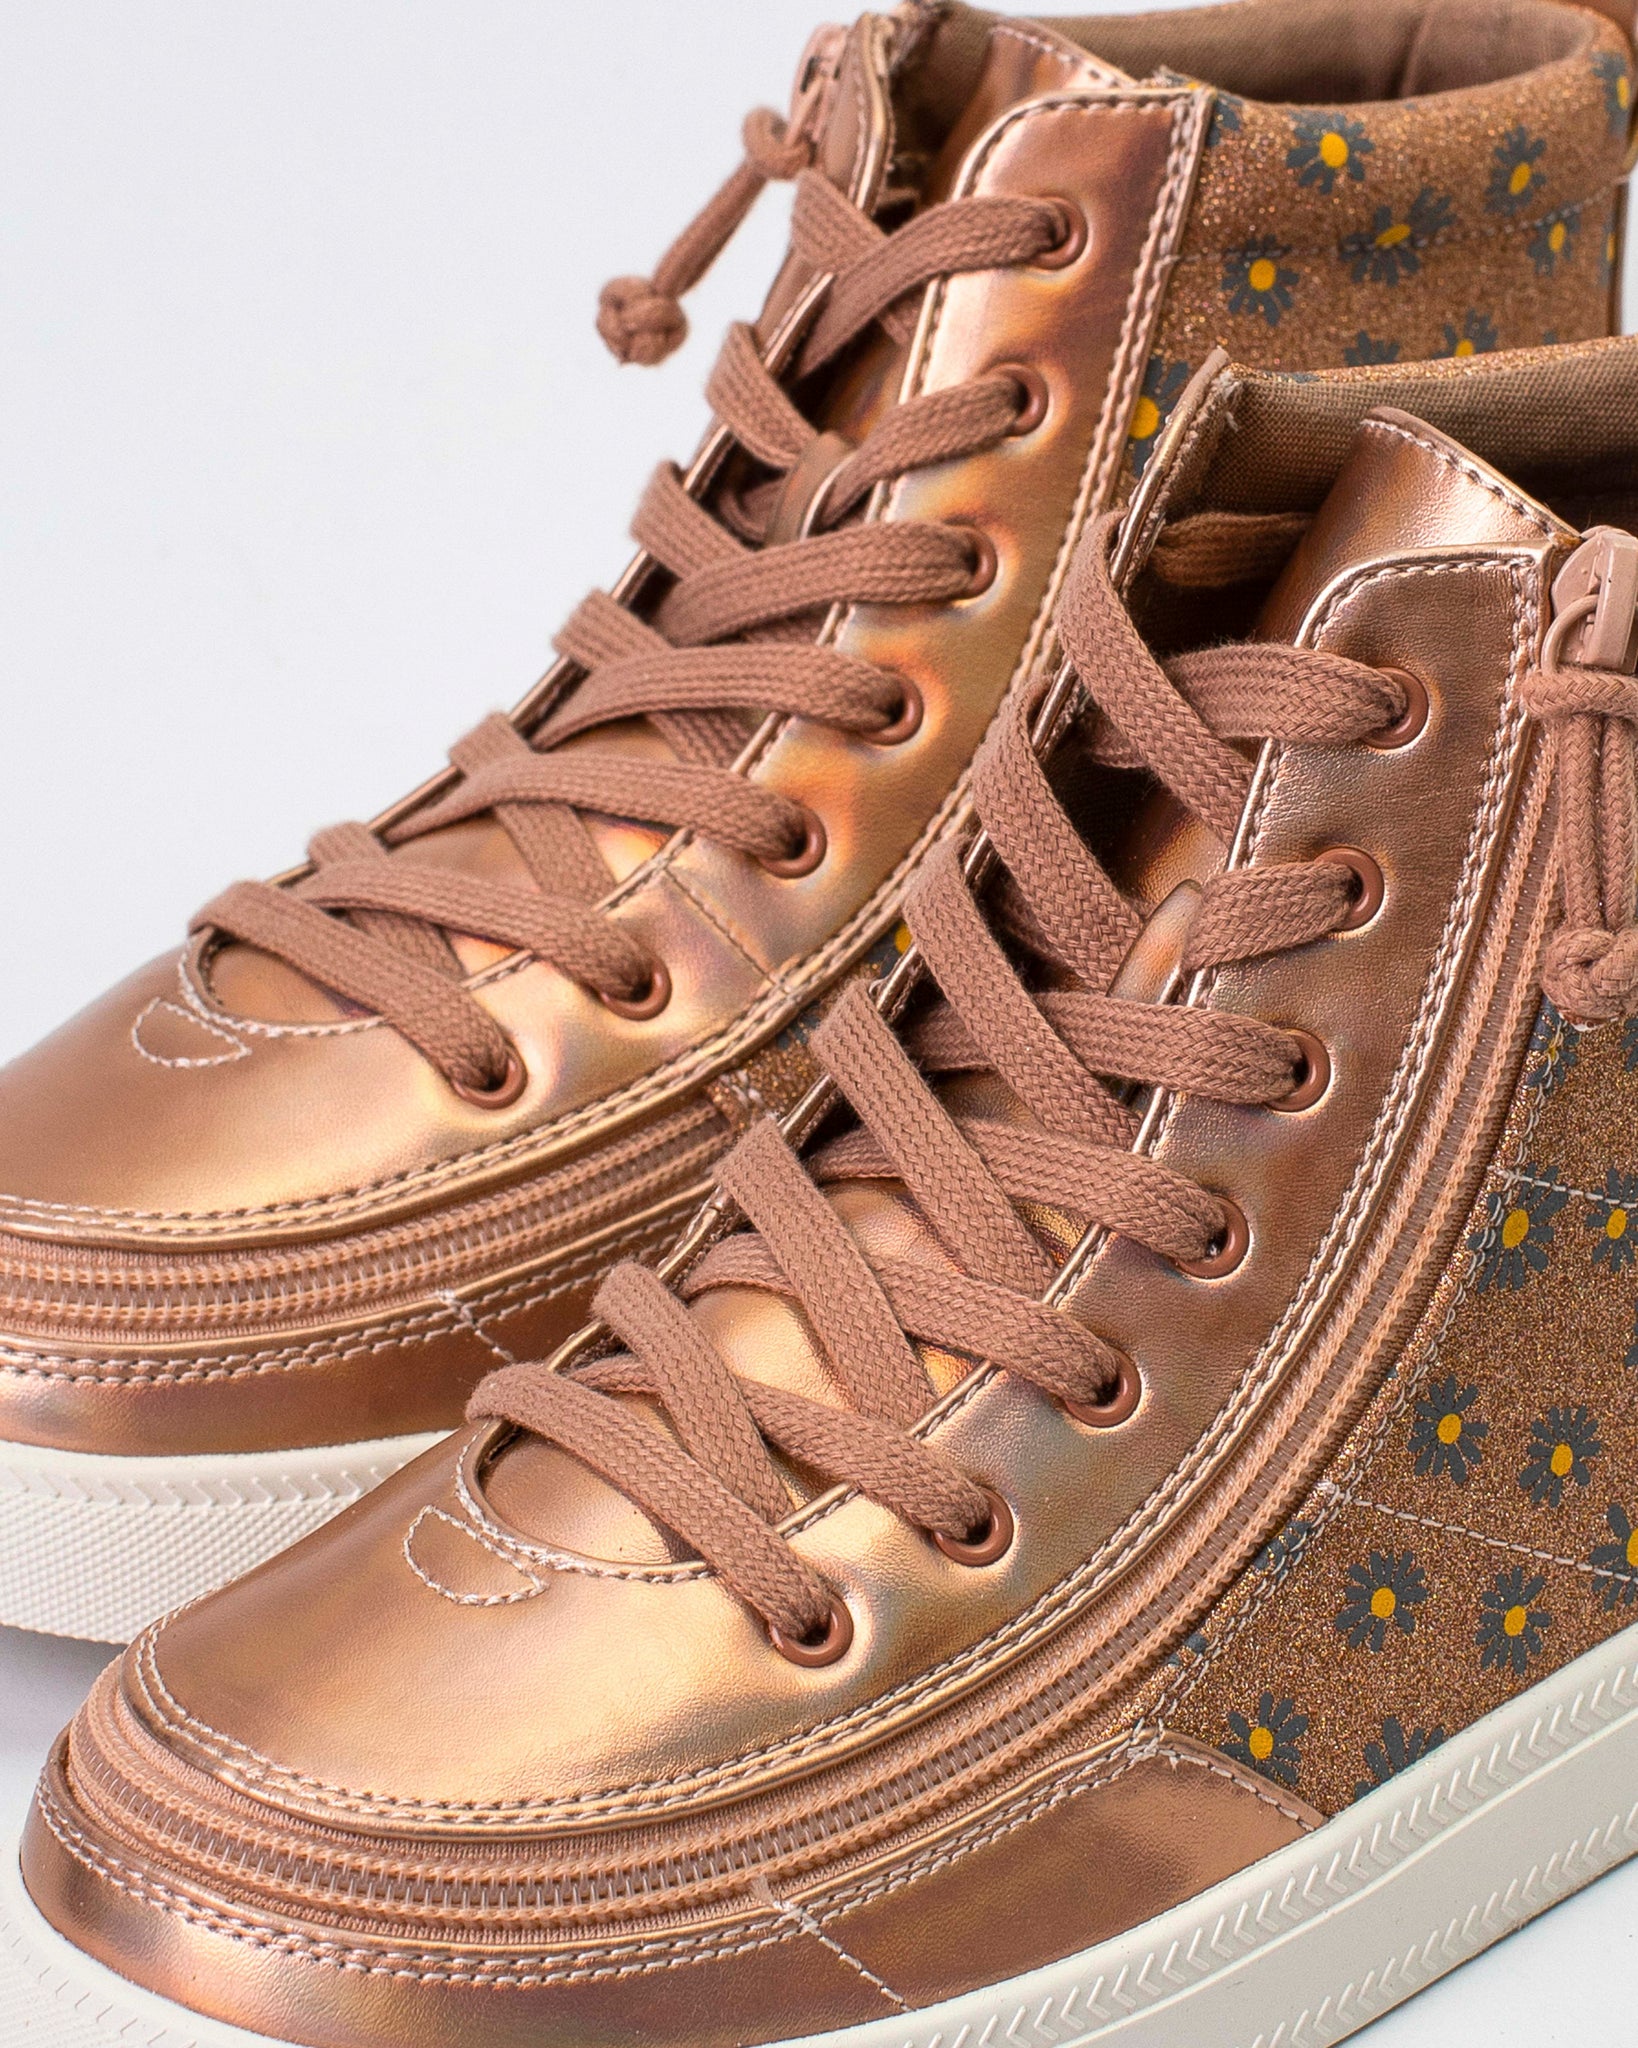 Classic High Top (Toddlers) - Rose Gold Daisy